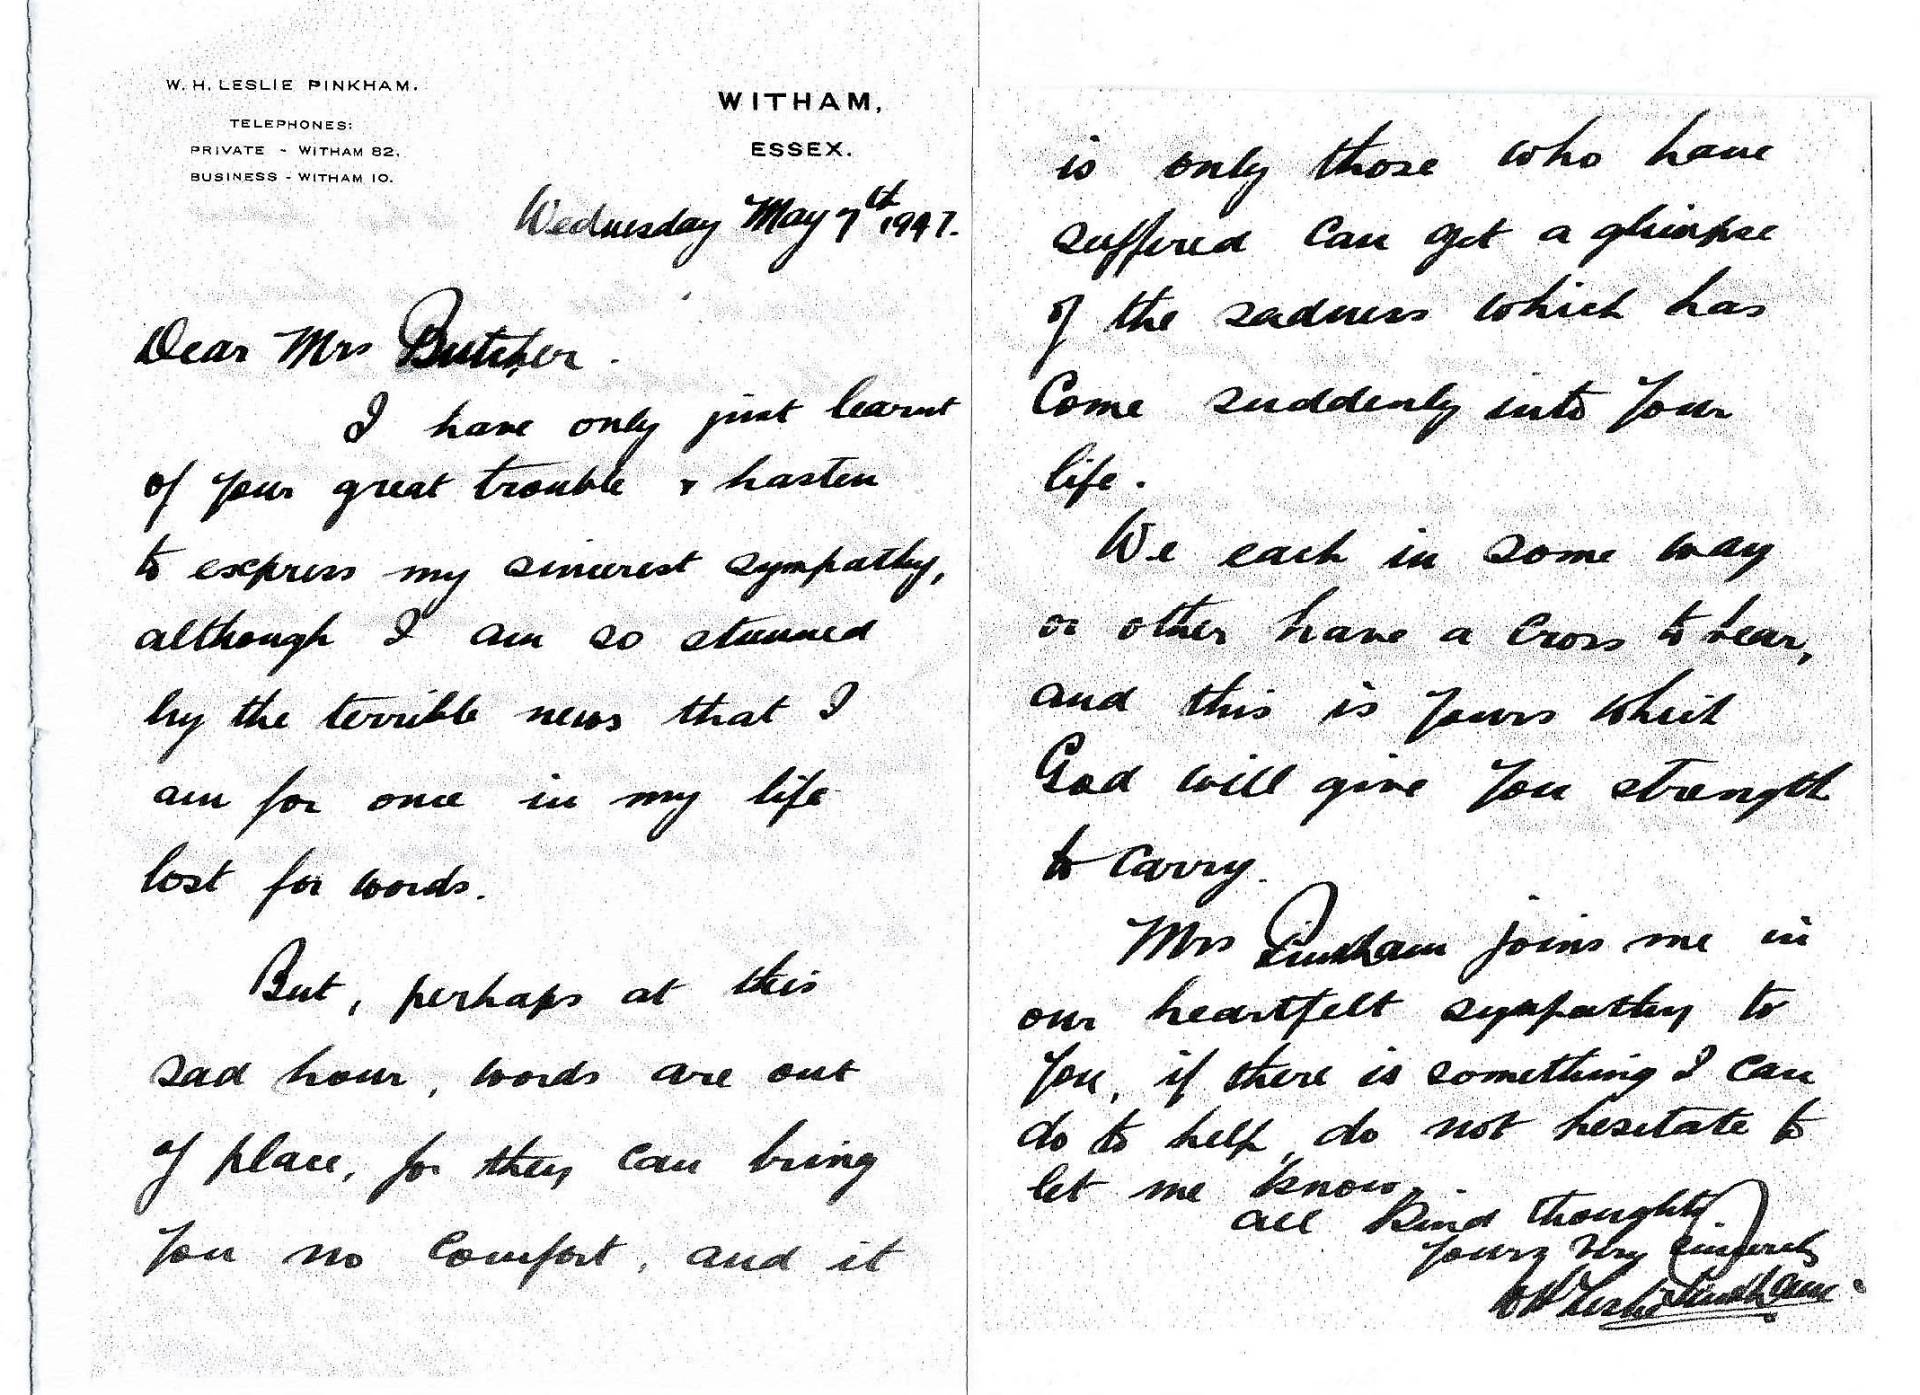 Letter-WHLP-to-Mrs-Butcher-May-1947